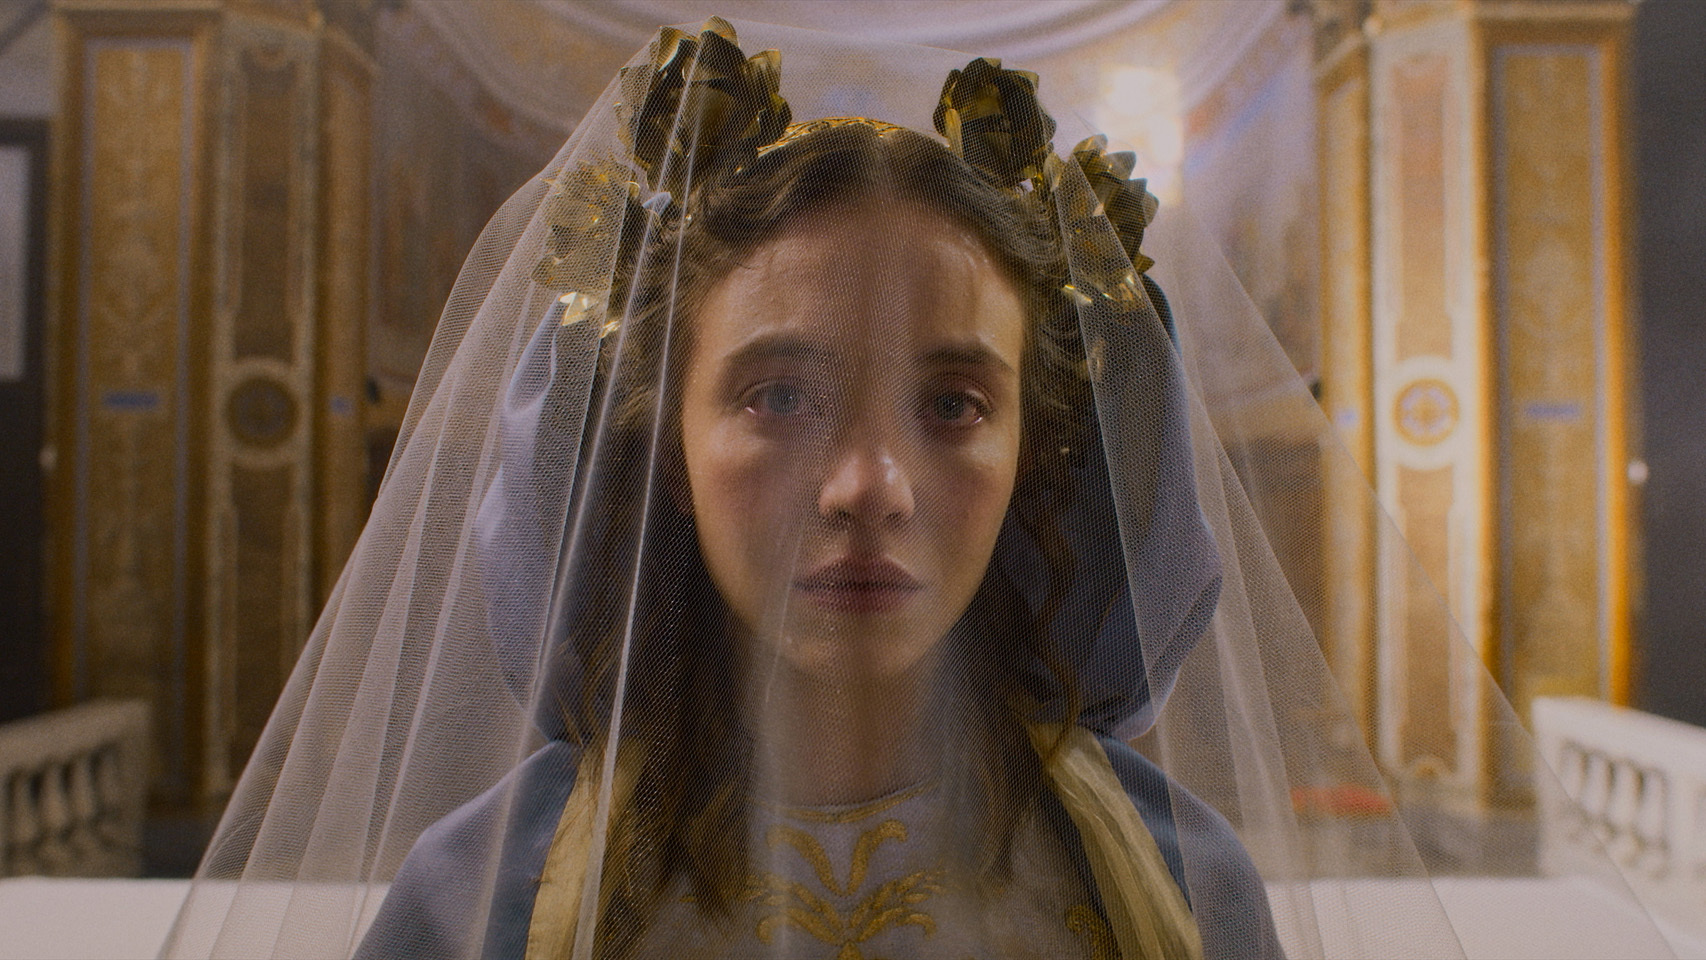 Sydney Sweeney crying under a veil in a still from her new movie, Immaculate